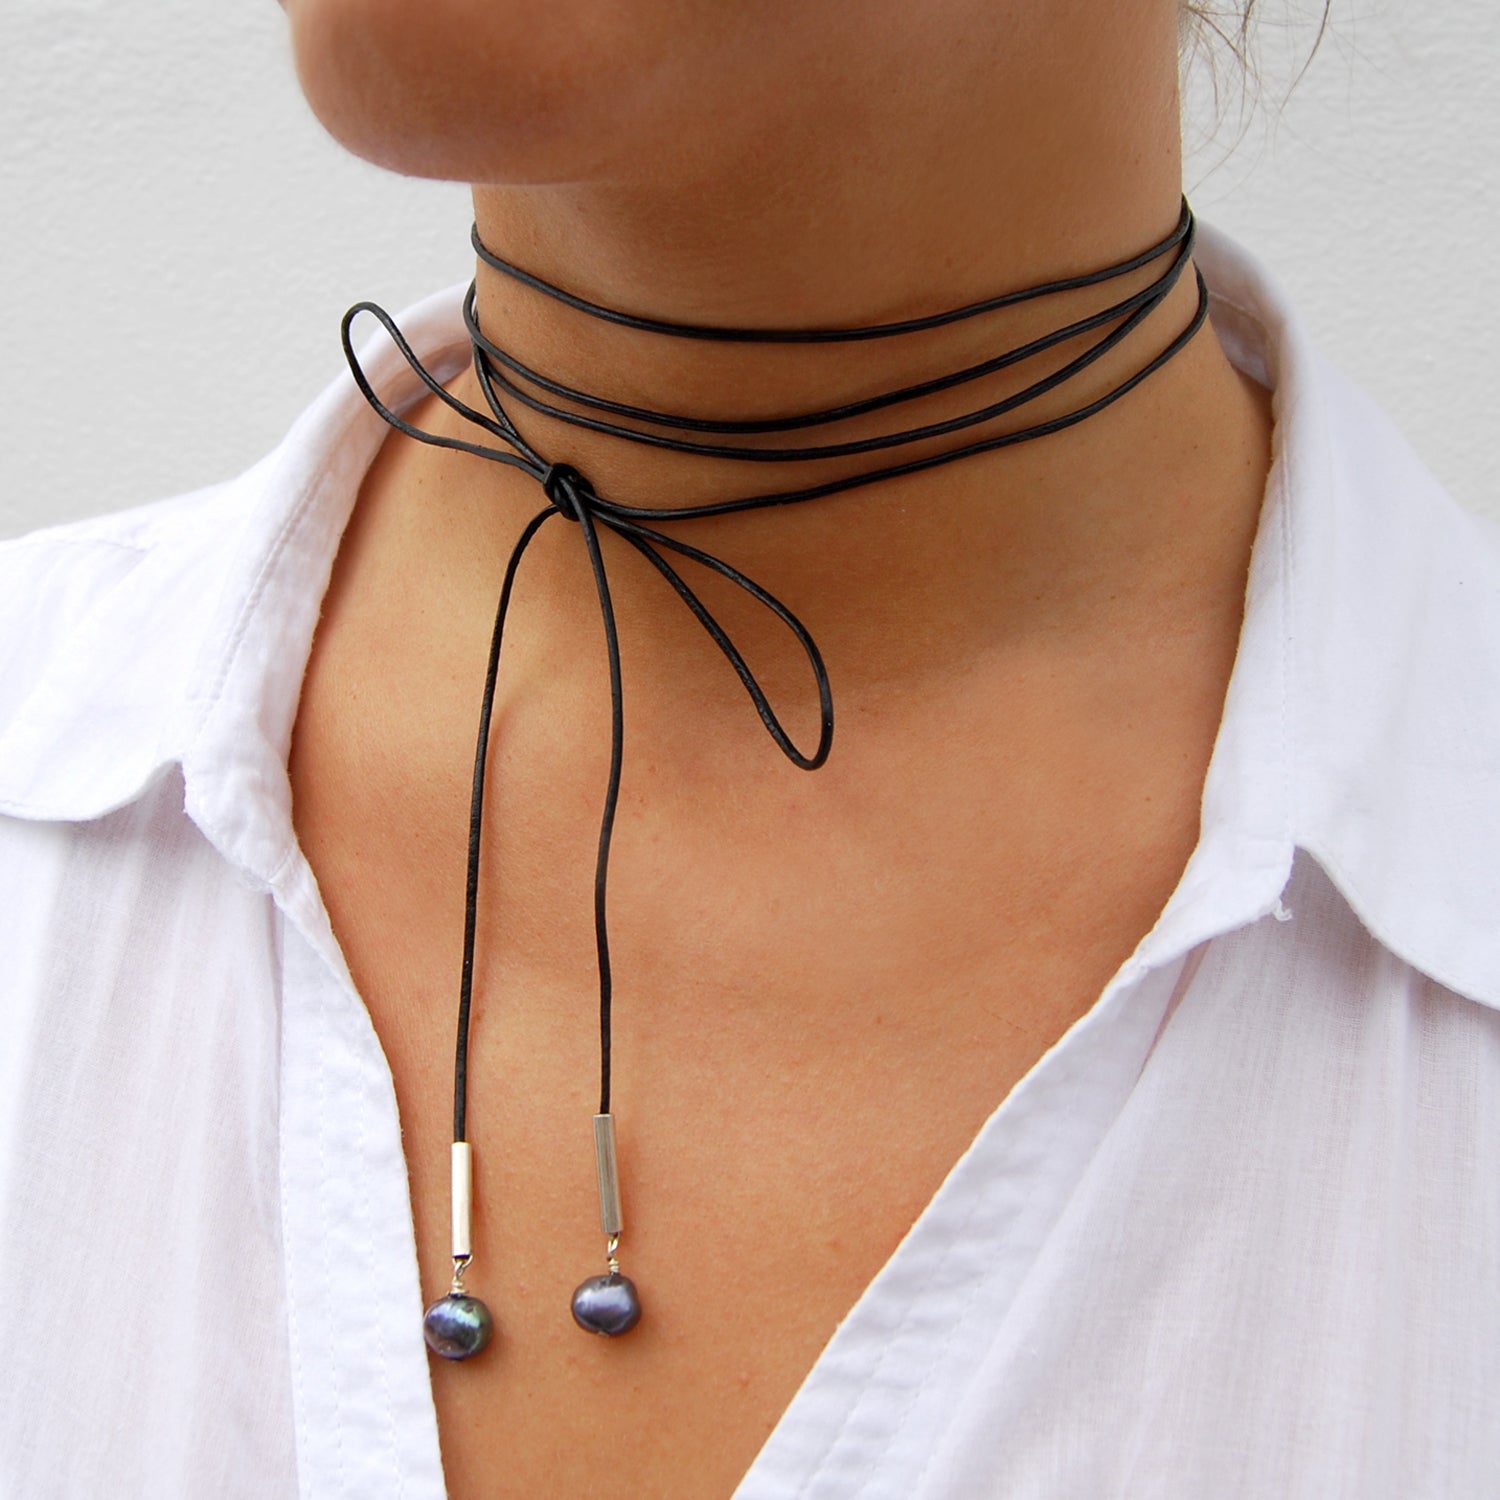 Joyful Black Leather Necklace With Two Pearl Drops